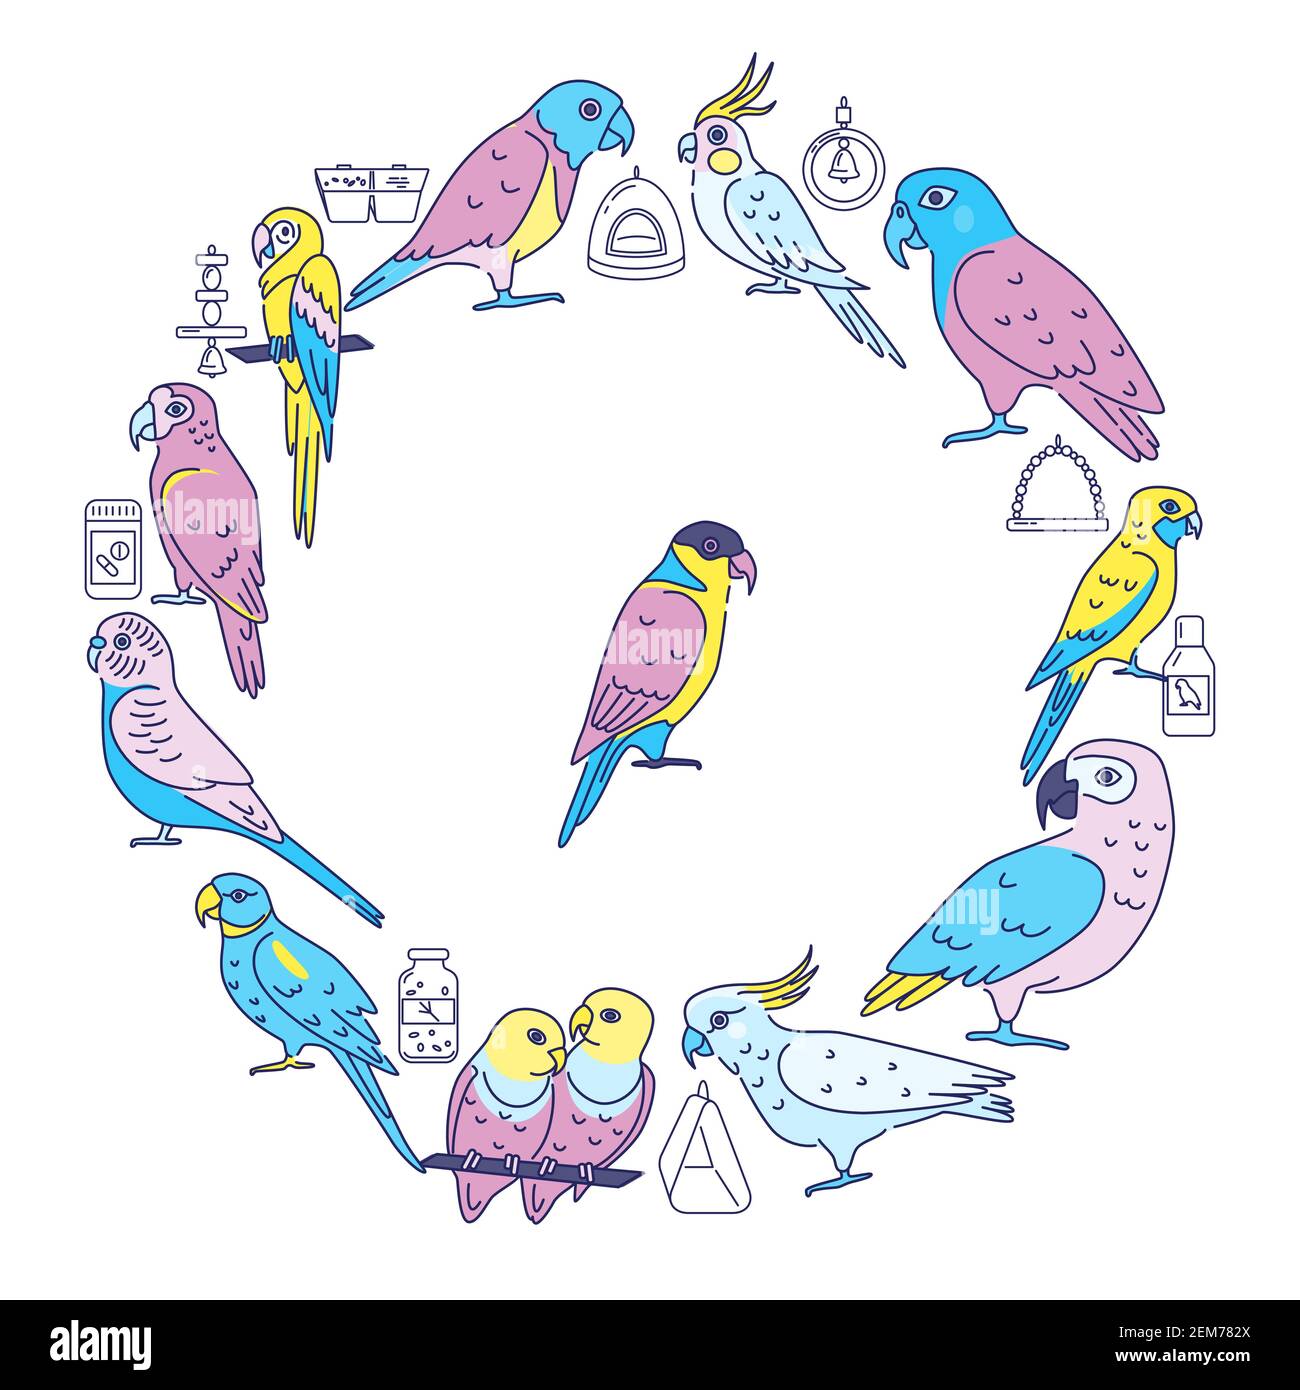 Parrots round concept banner in line style. Tropical birds and accessories symbols poster template. Vector illustration. Stock Vector